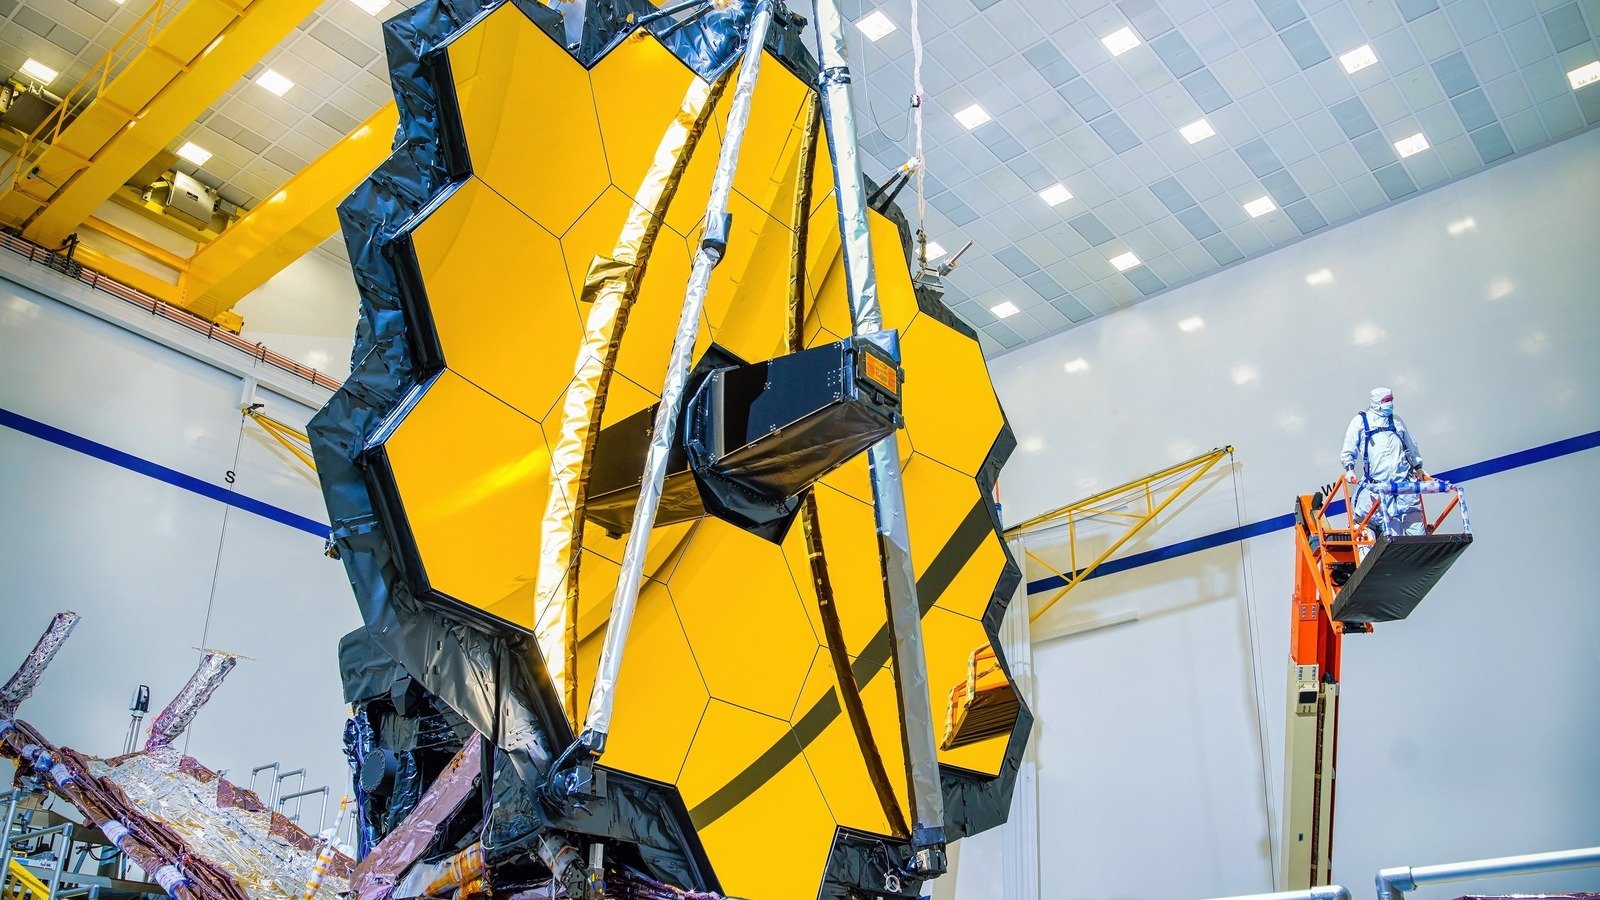 The Reason The James Webb Space Telescope Doesn't Have Any Cameras Onboard